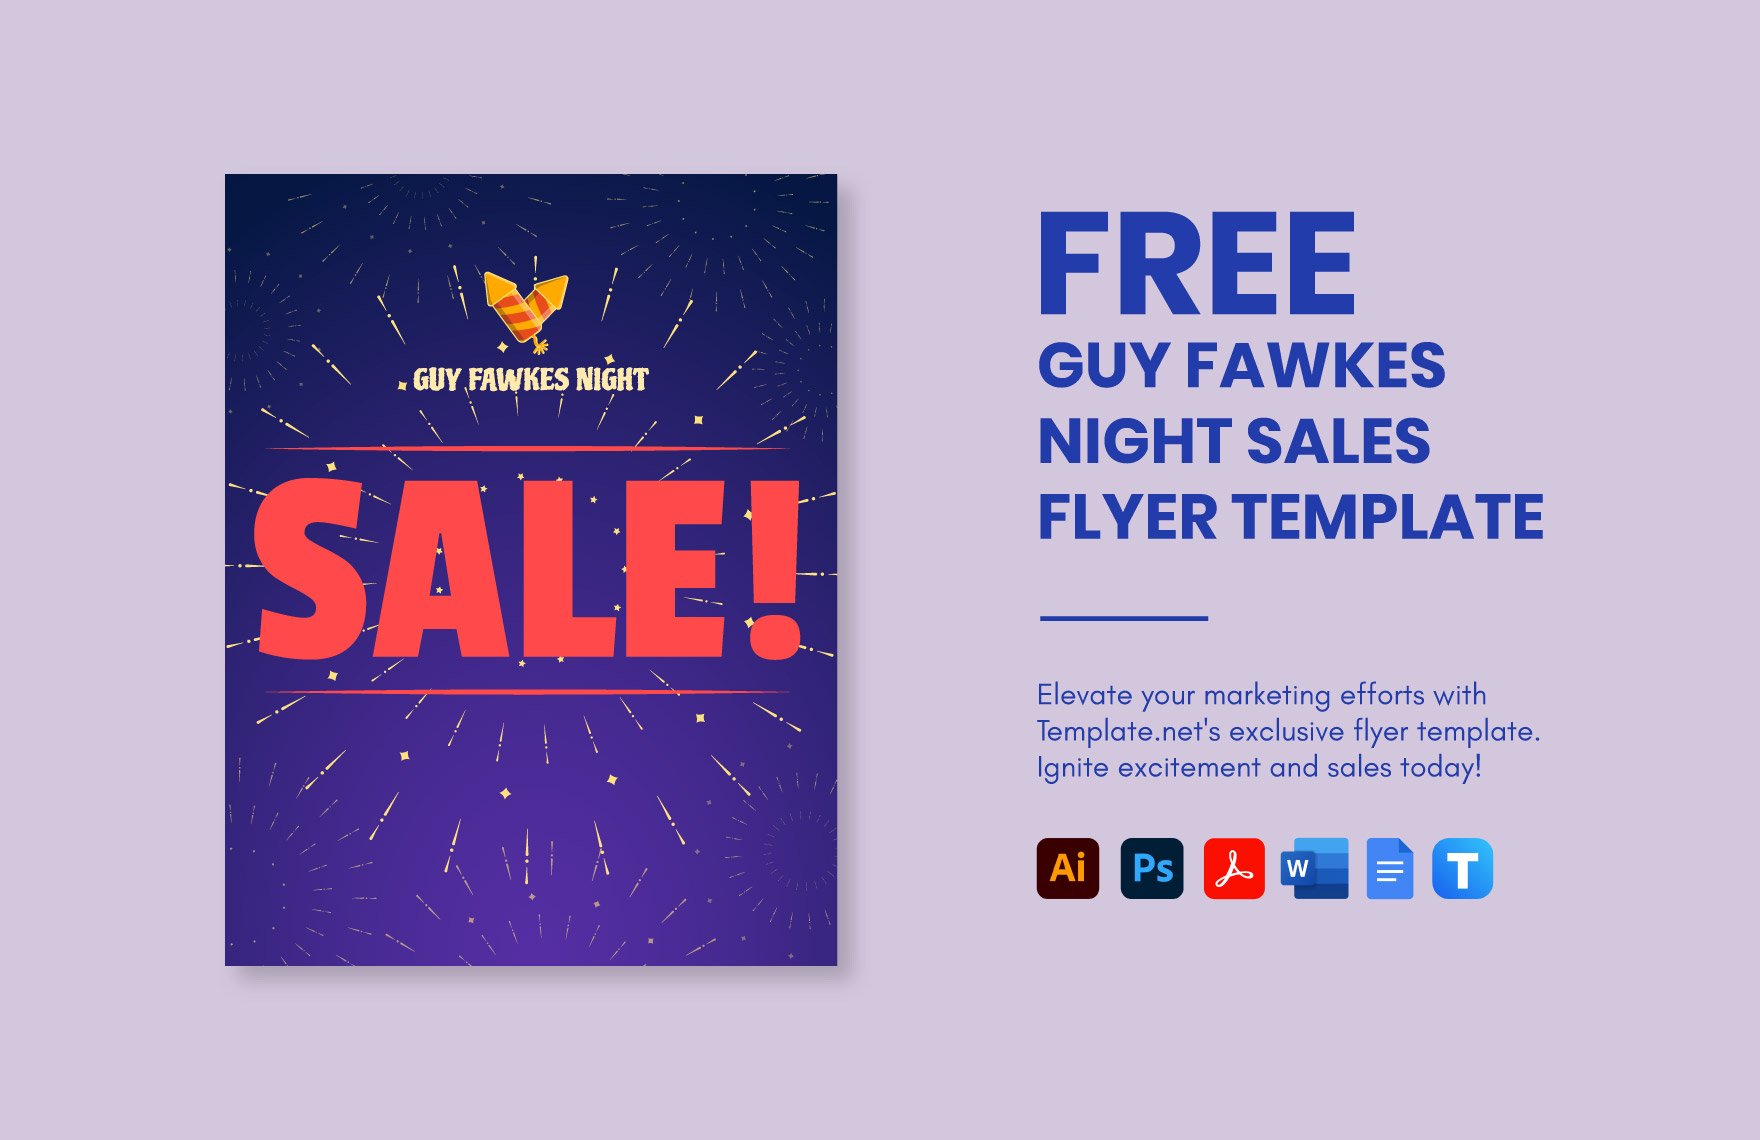 Guy Fawkes Night Sales Flyer Template